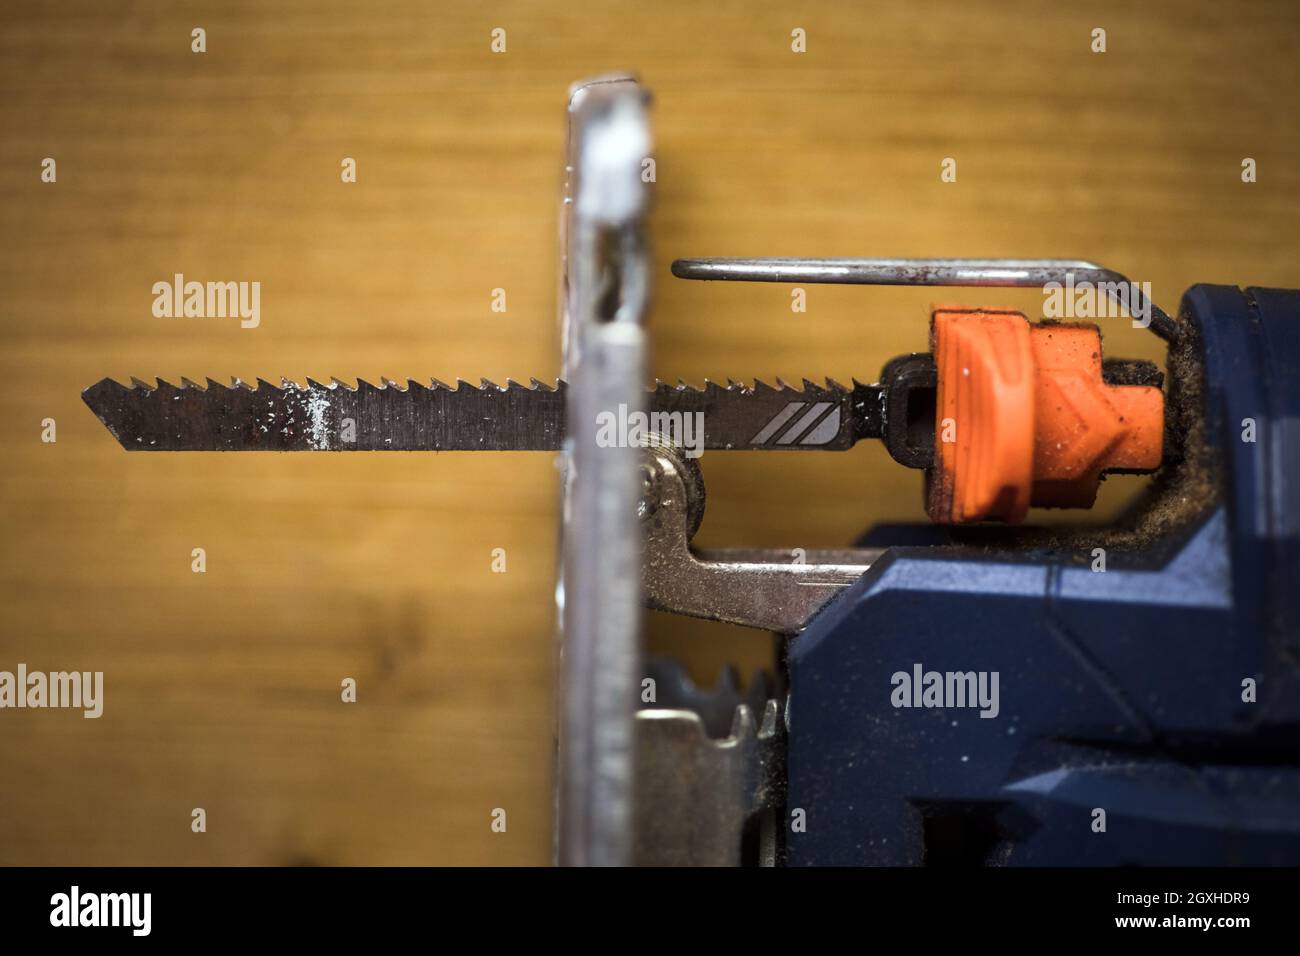 Detail of an electric jig saw on a wooden background. Stock Photo